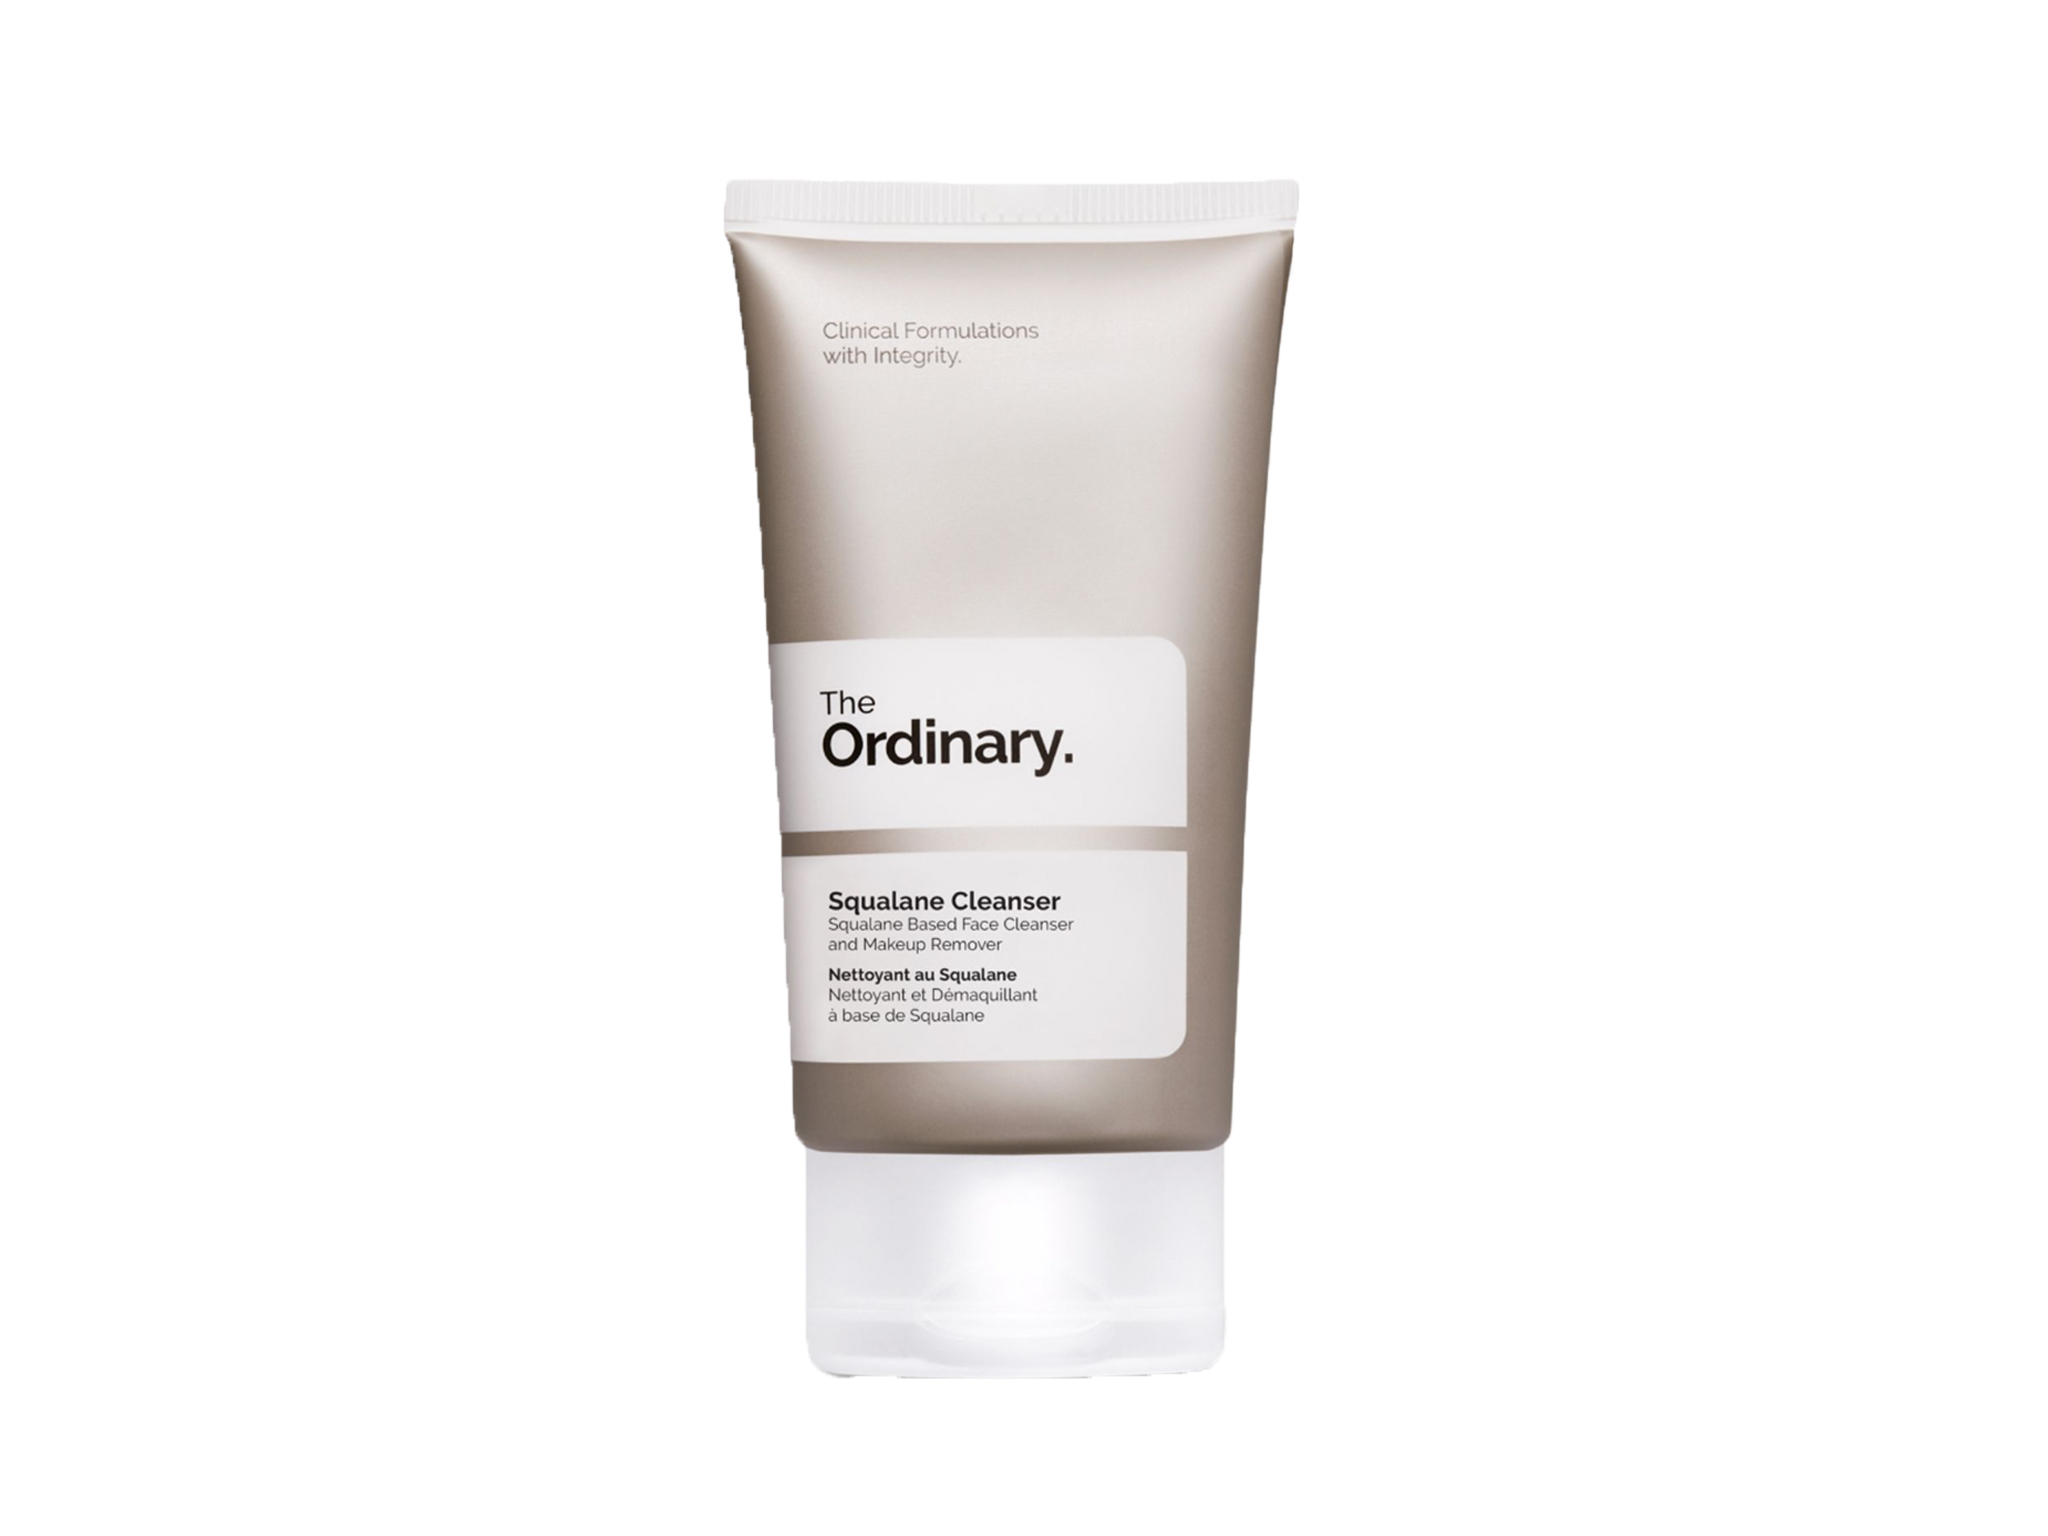 The Ordinary squalane cleanser